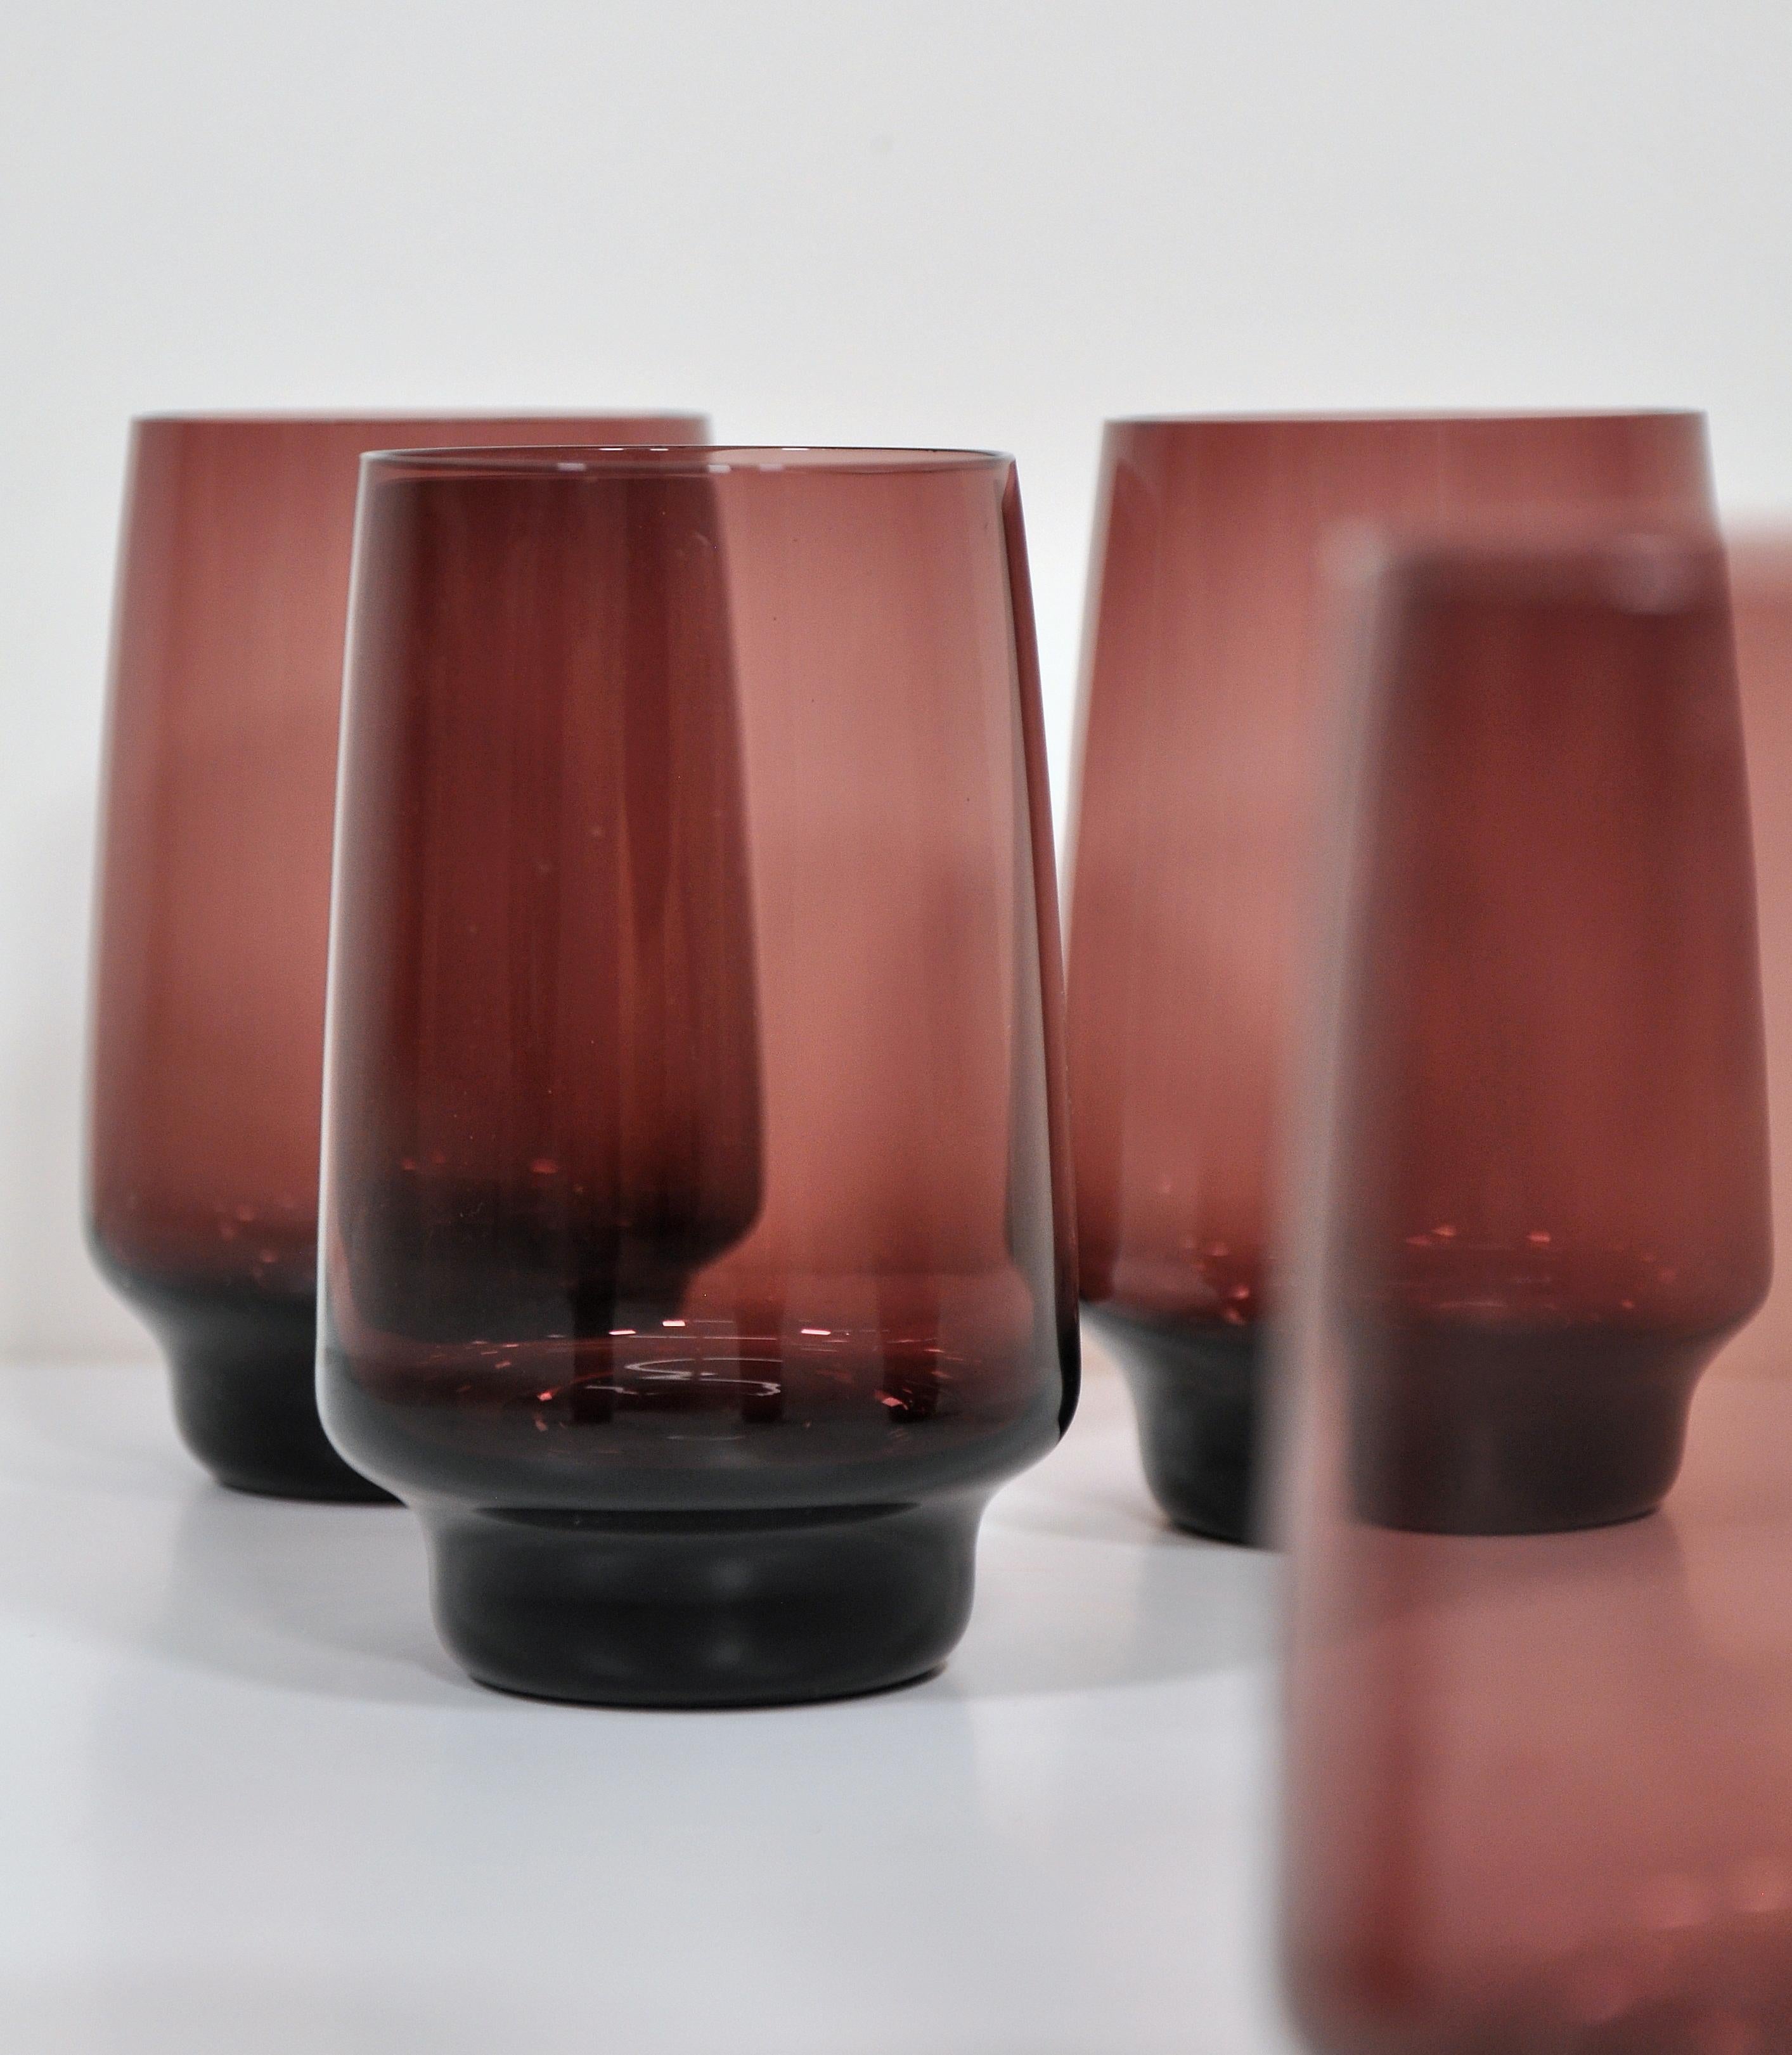 Vintage hand blown glass cocktail set including a carafe and 6 shaped stacking tumbler glasses in a gorgeous plum color. The footed jug features a clear glass handle and pinched spout. The glasses and set as a whole have a clean and modern aesthetic